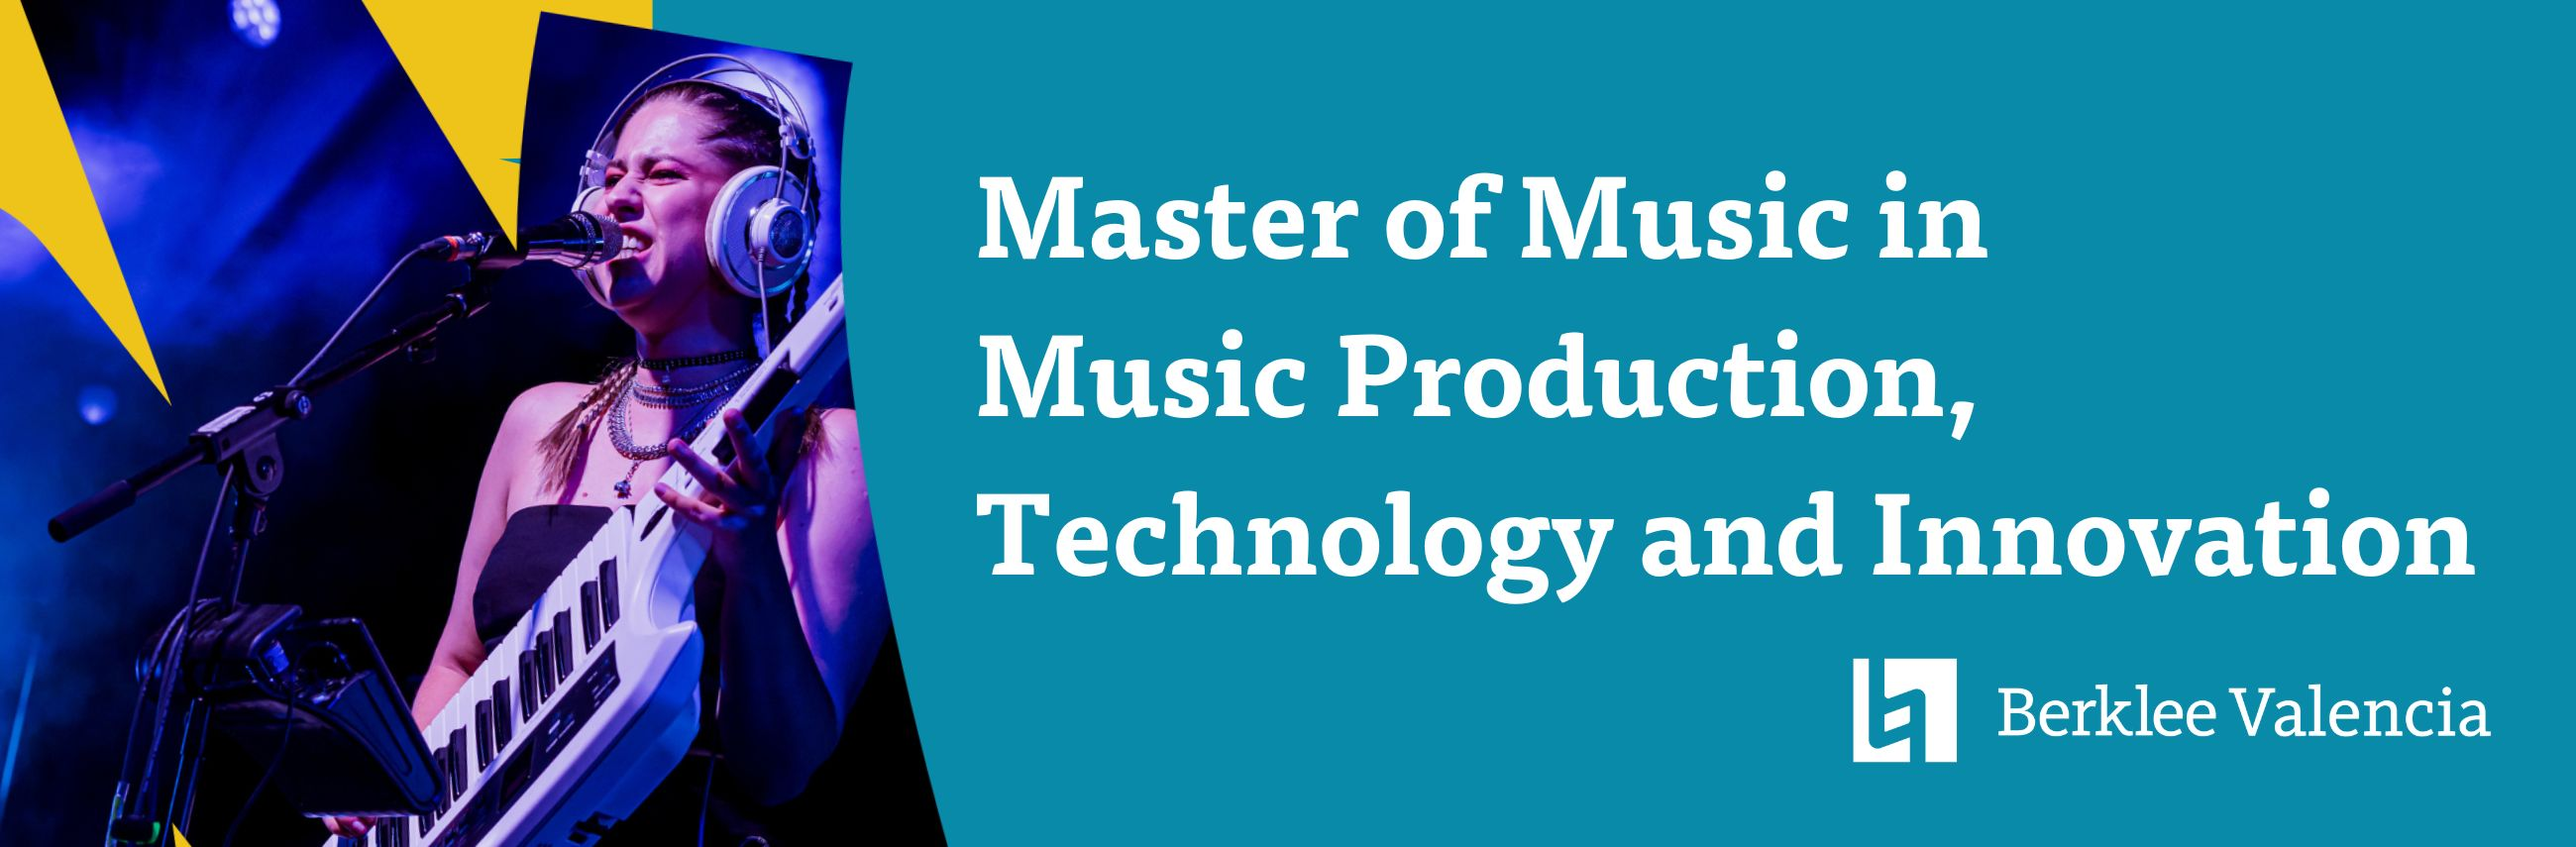 Master of Music in MPTI